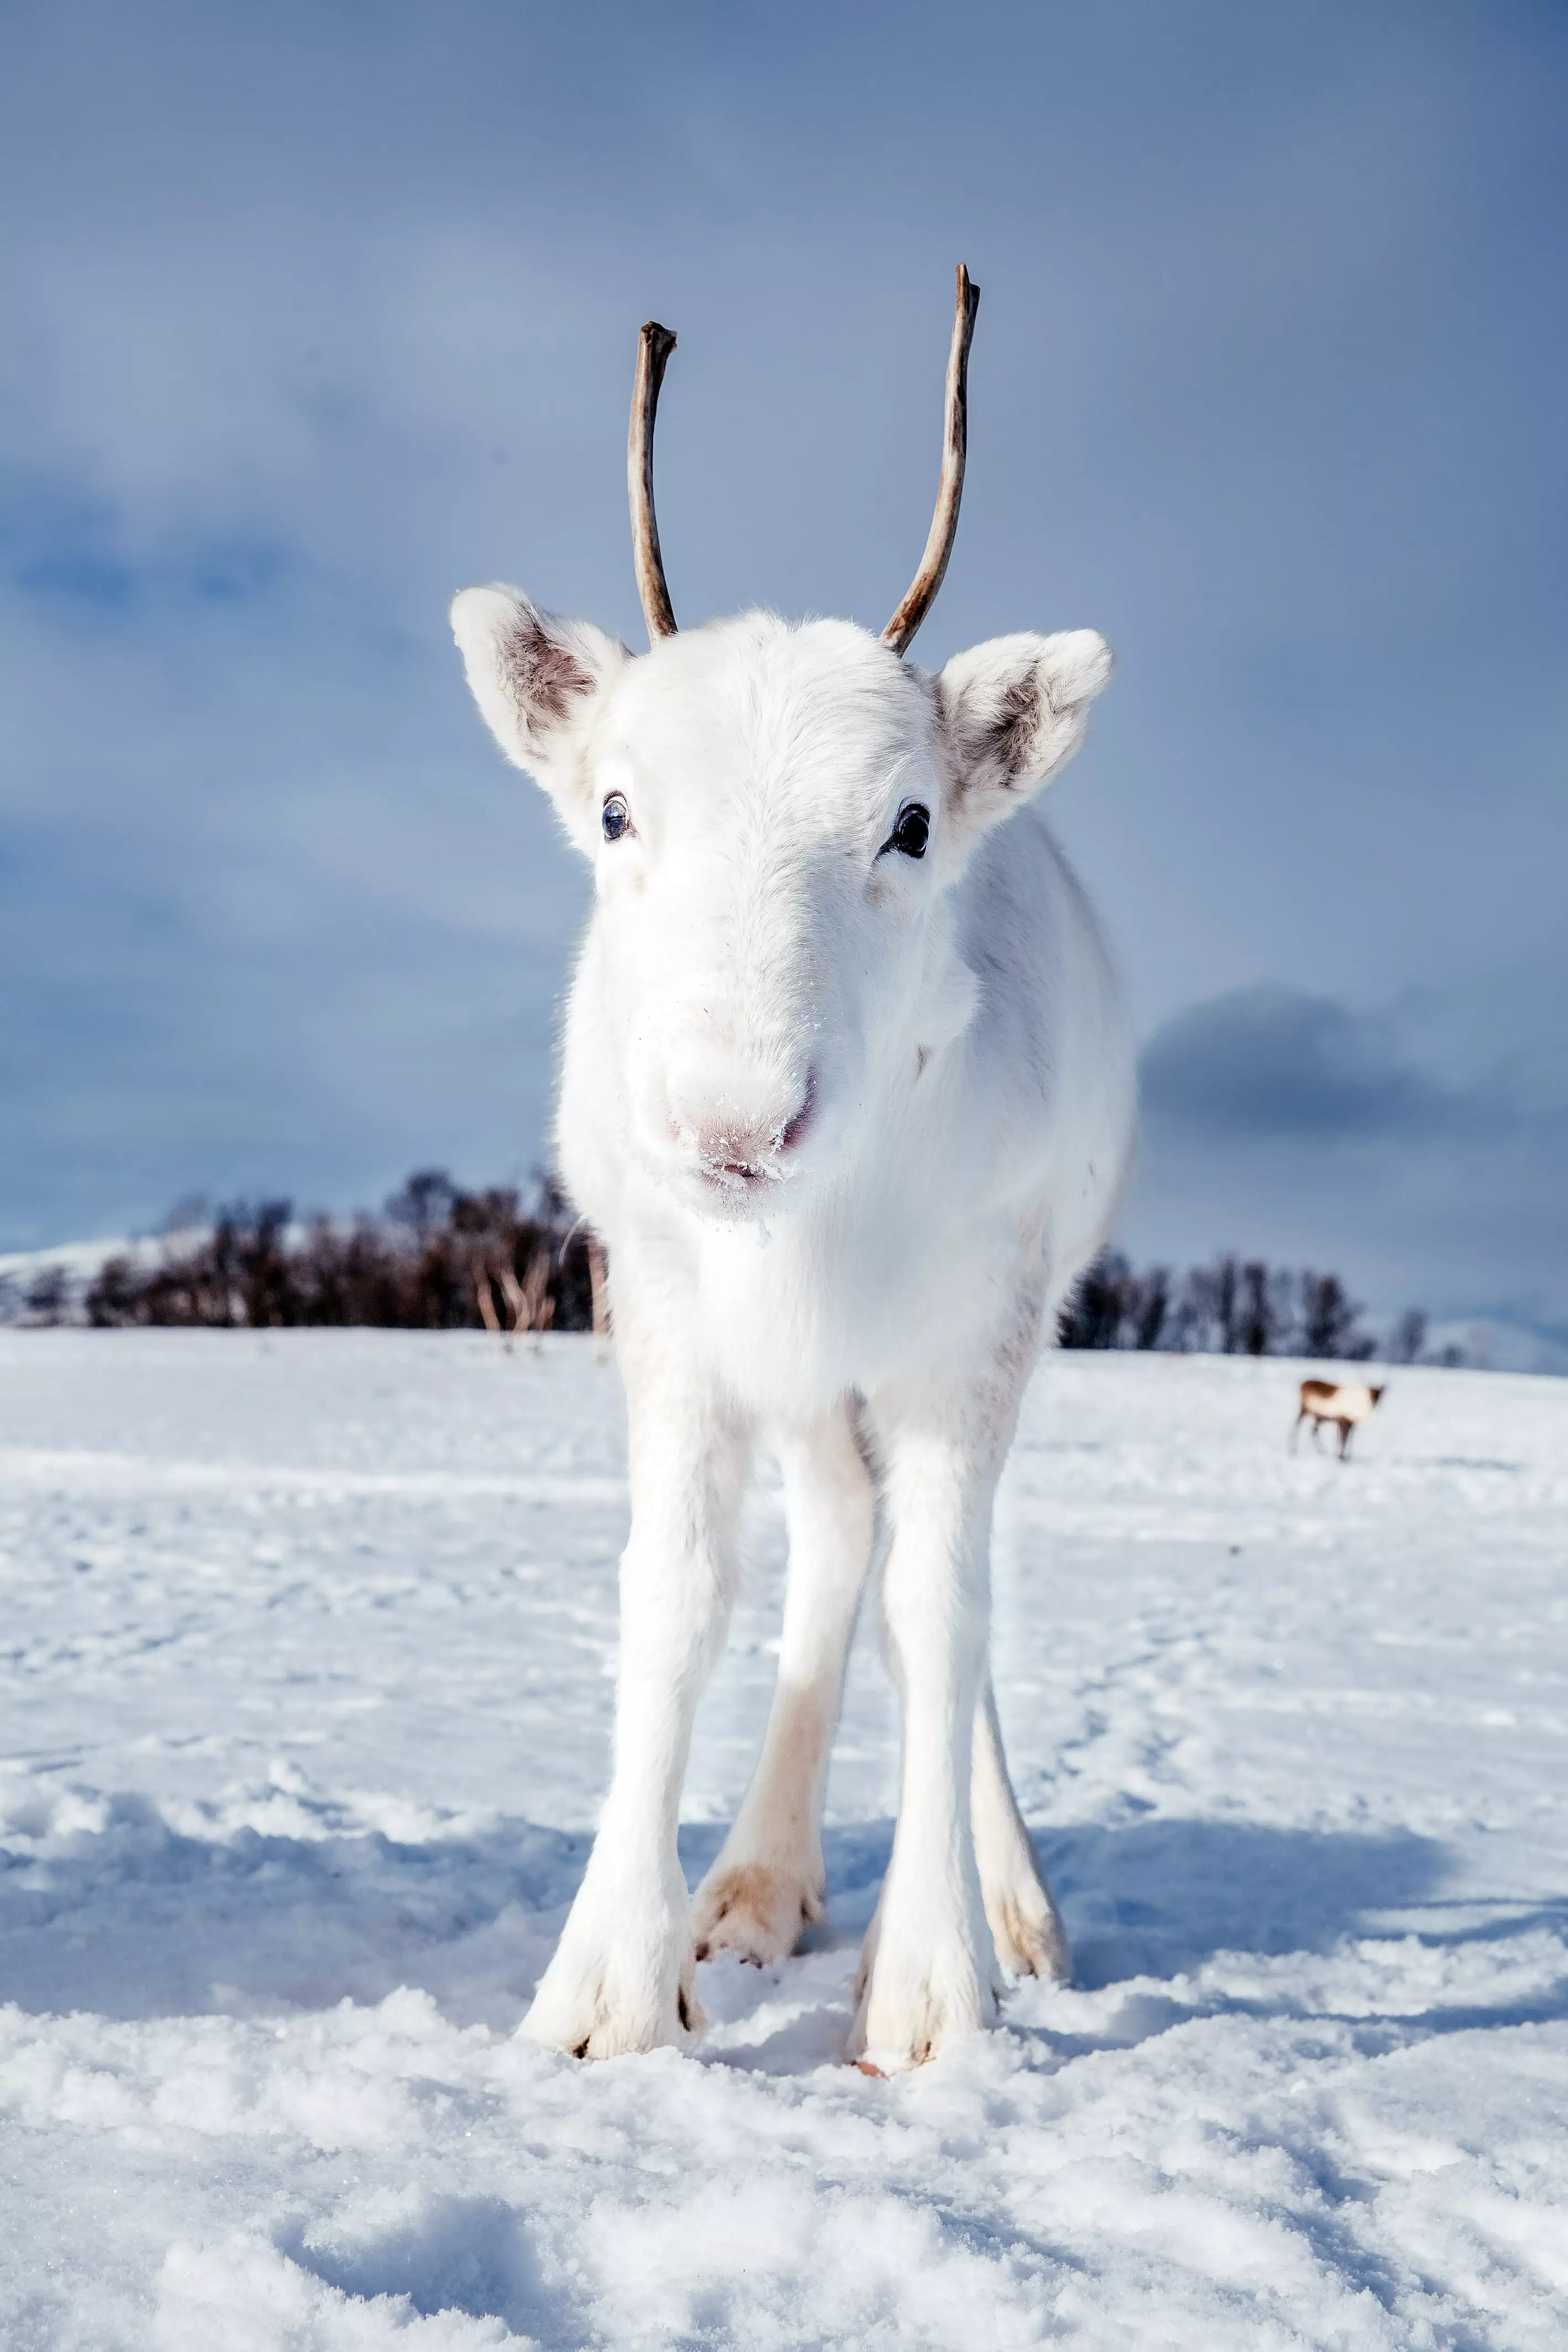 White reindeer are not classed as albino because their eyes and their antlers still have dark pigmentation. (